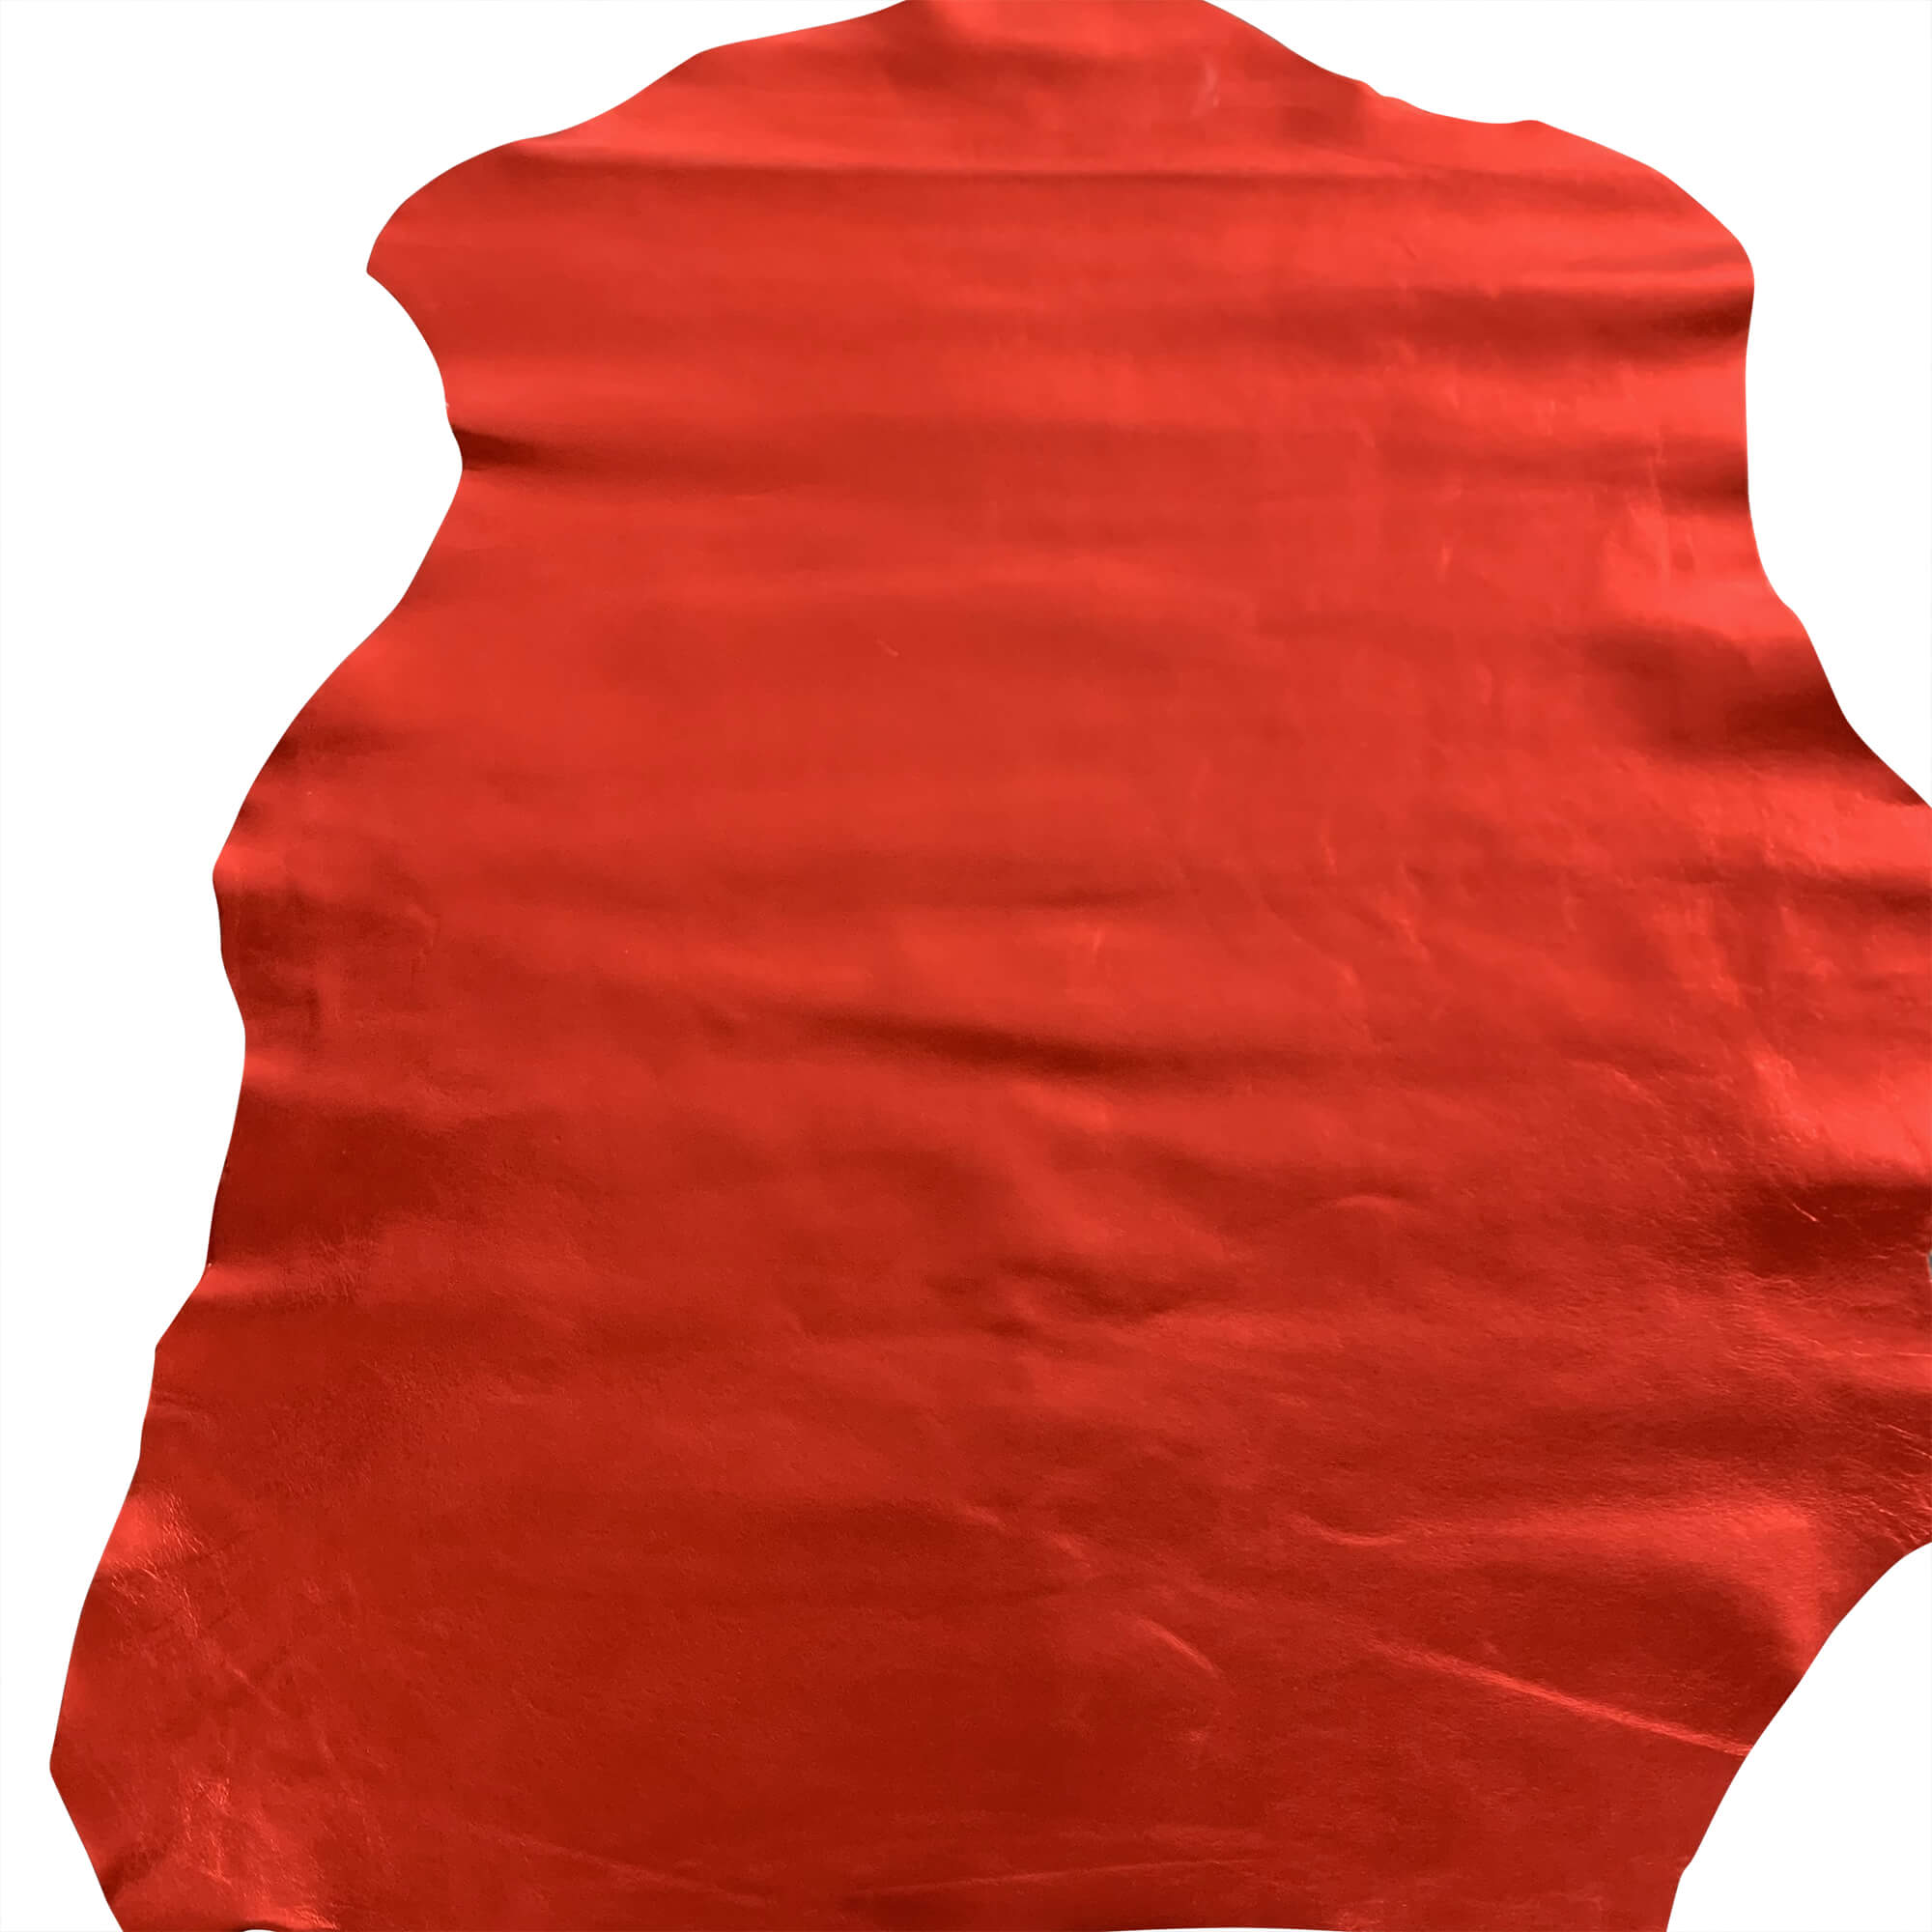 Red leather using historical dye (madder) — NVG, Miklagard